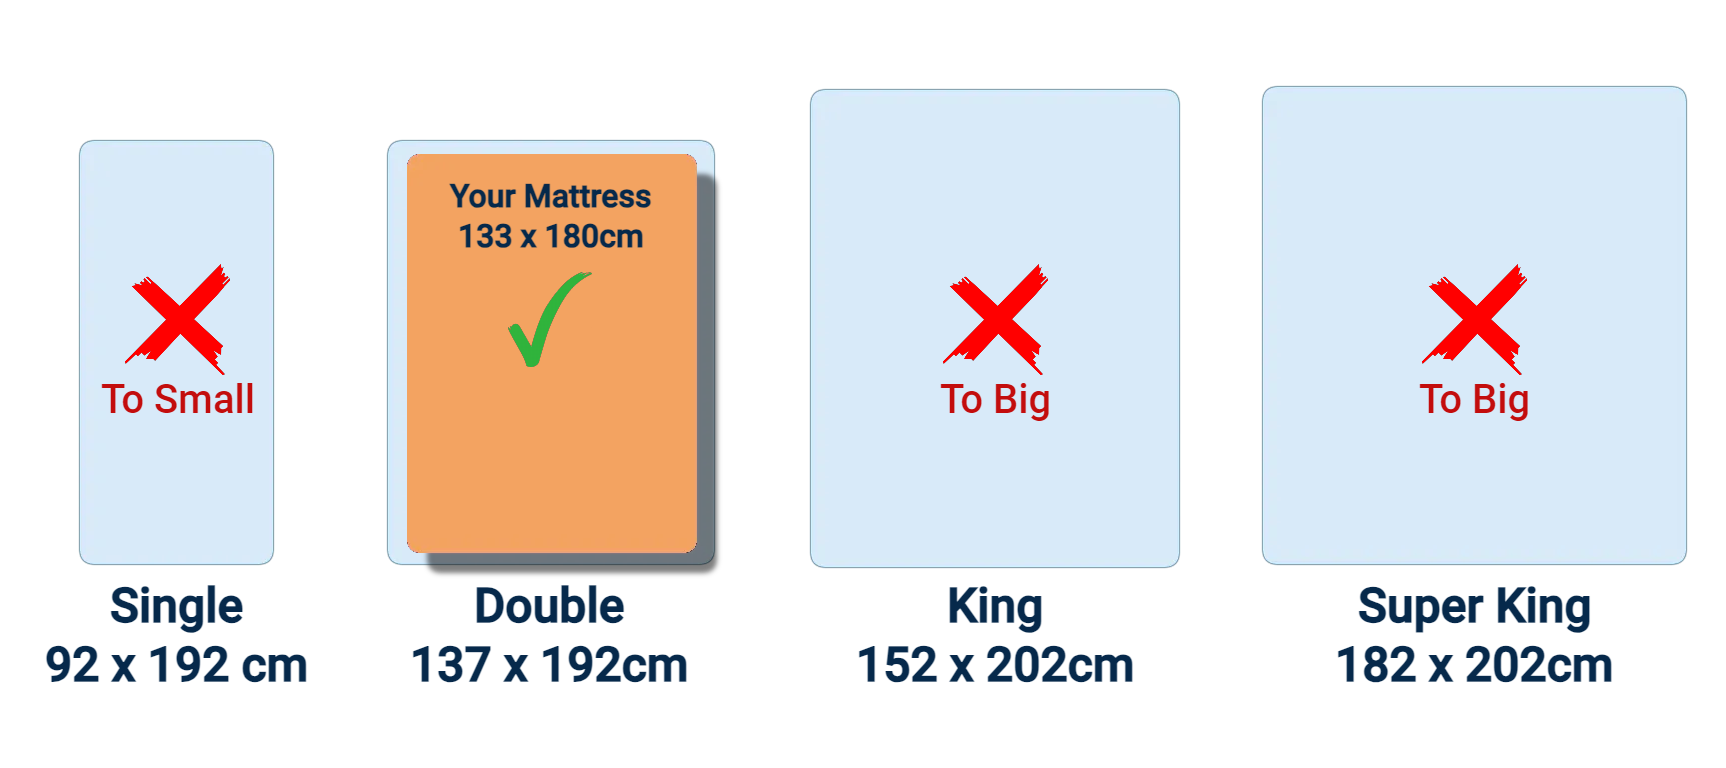 Image showing different mattress sizes